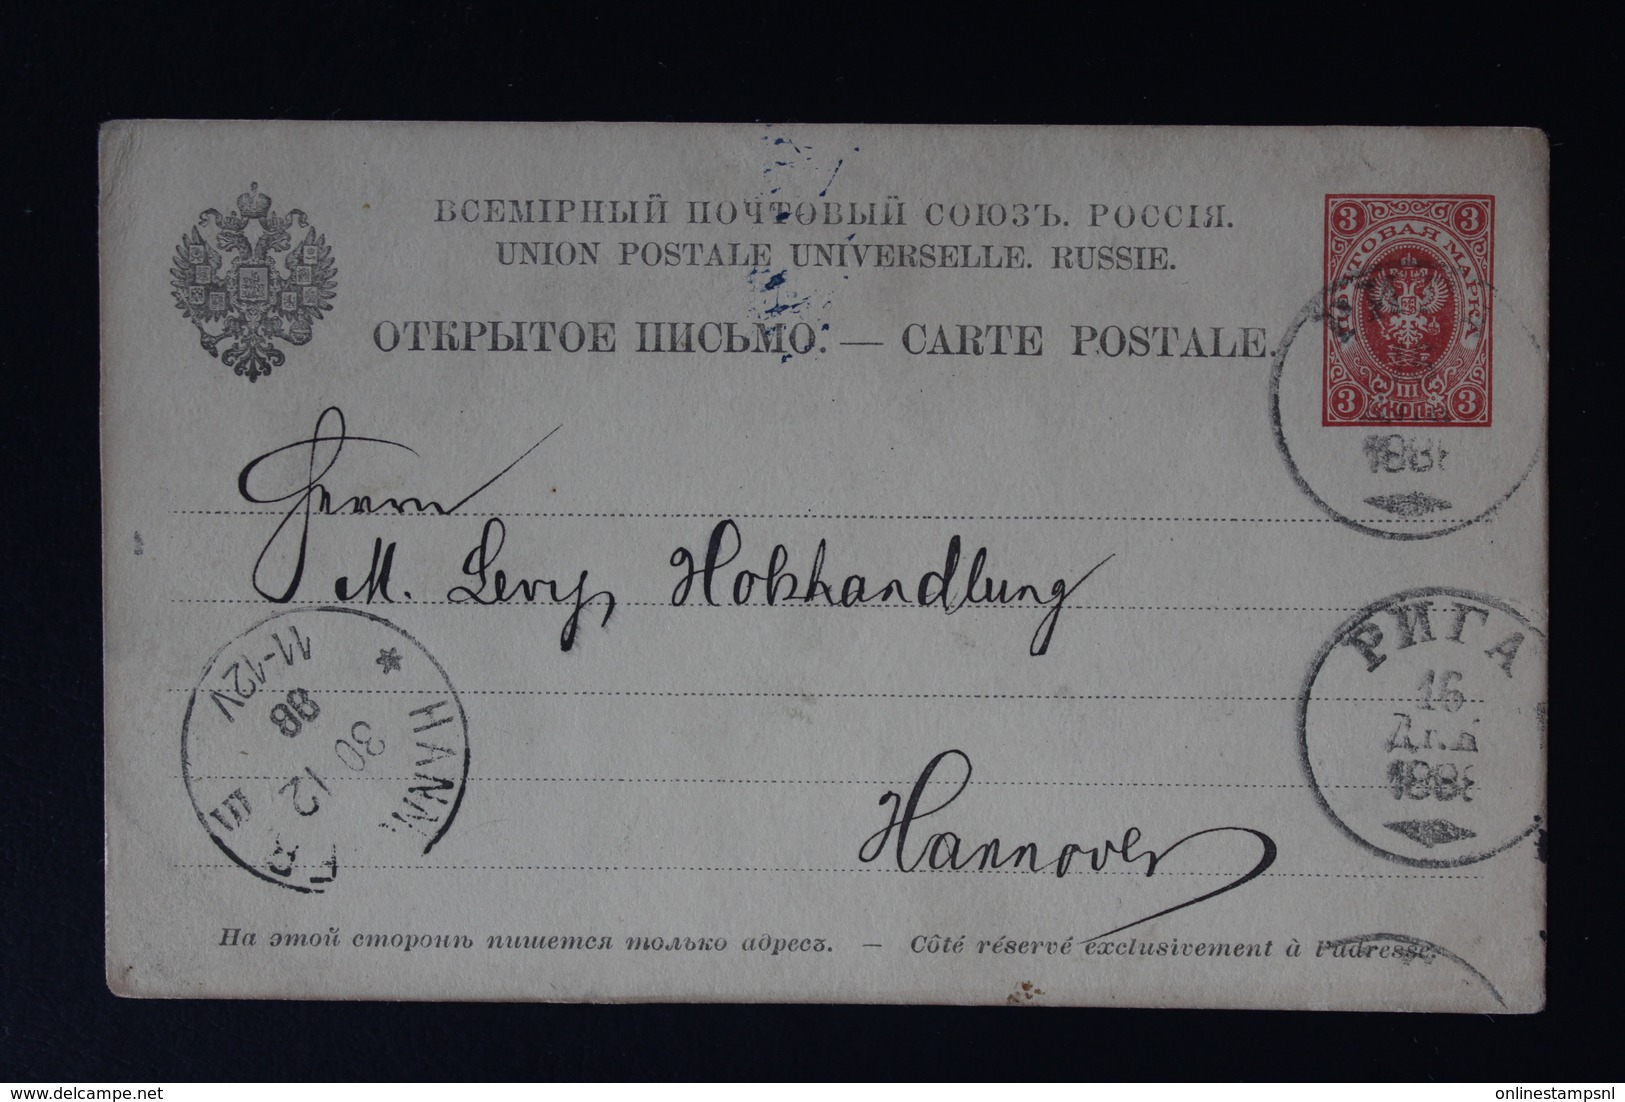 RUSSIA POSTCARD RIGA TO HANNOVER 1888  P7 - Stamped Stationery